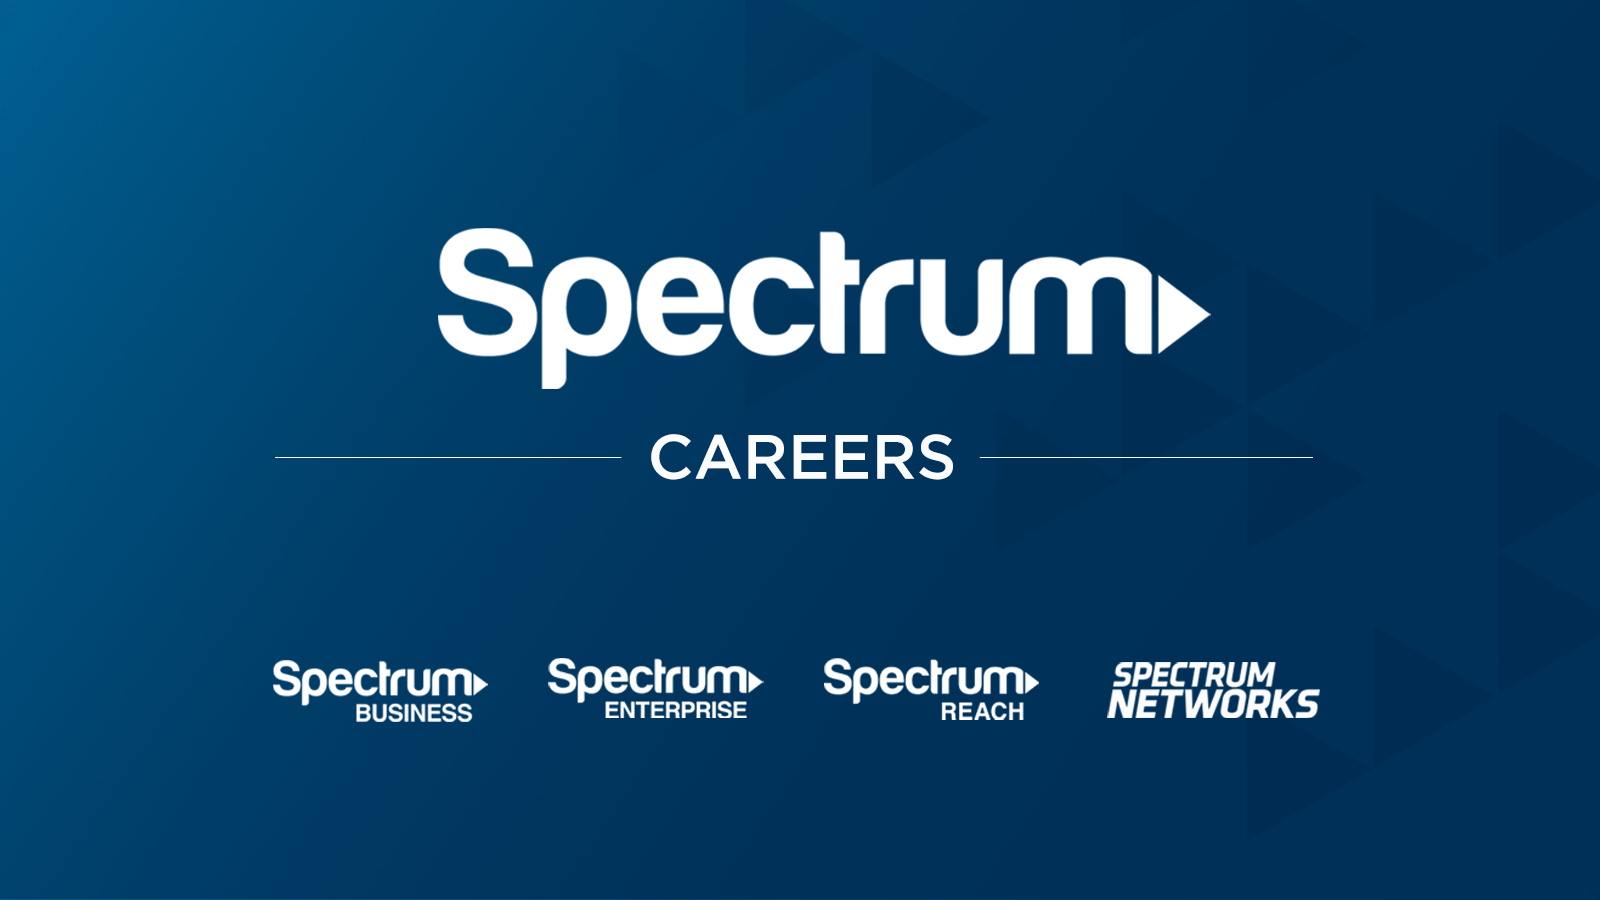 Learn more about and apply for the Mgr, Business Planning at Spectrum here